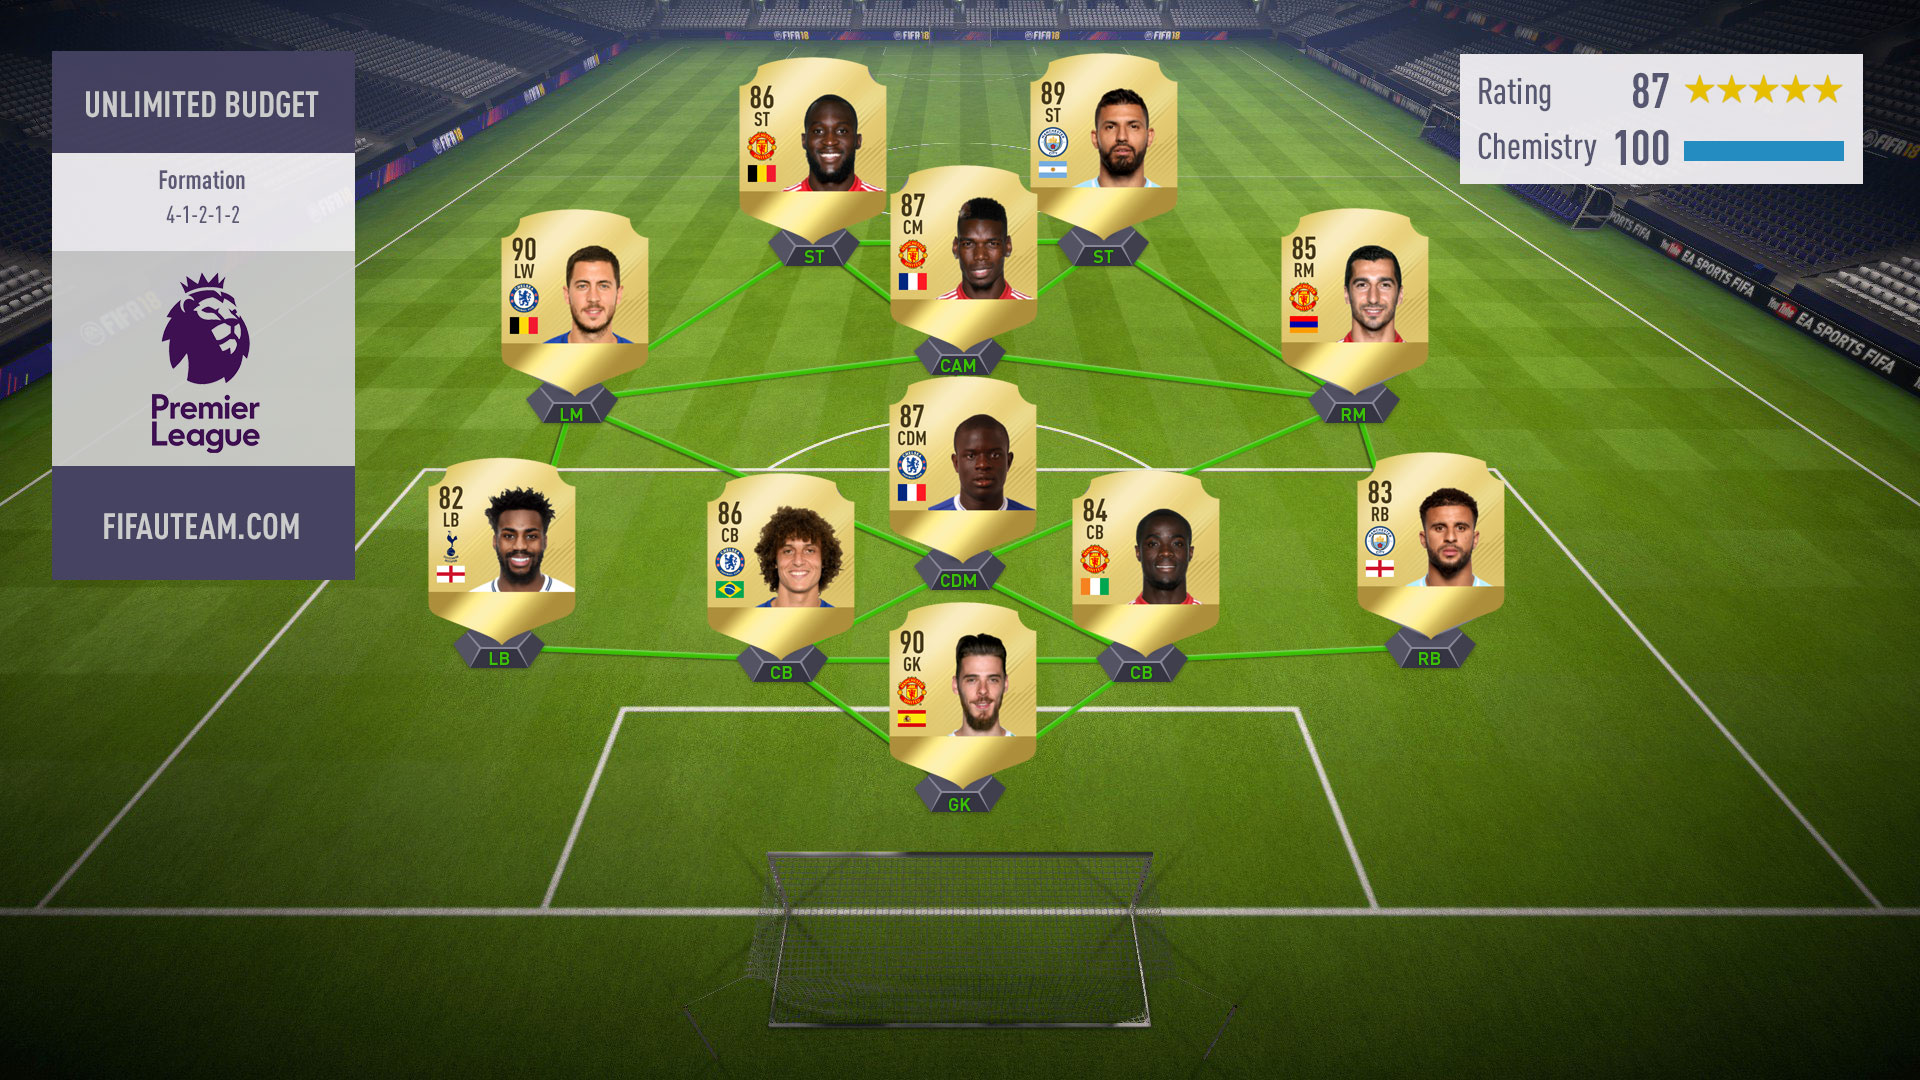 The Best FIFA 18 League to Play on Ultimate Team